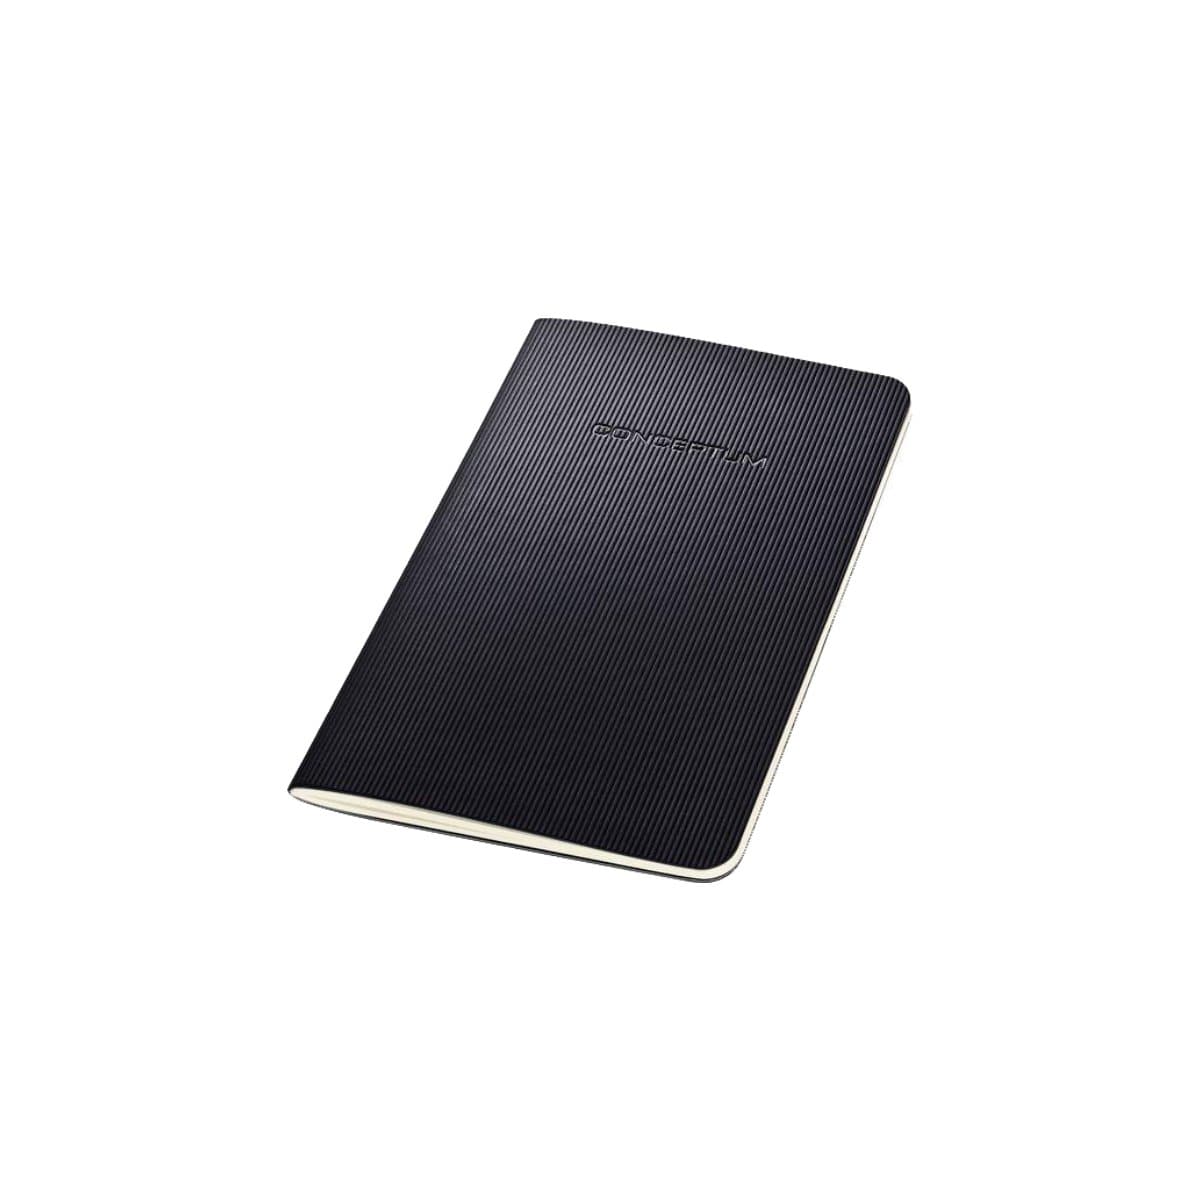 Sigel Journal CONCEPTUM A6, Stapled, Softcover, Lined, Black